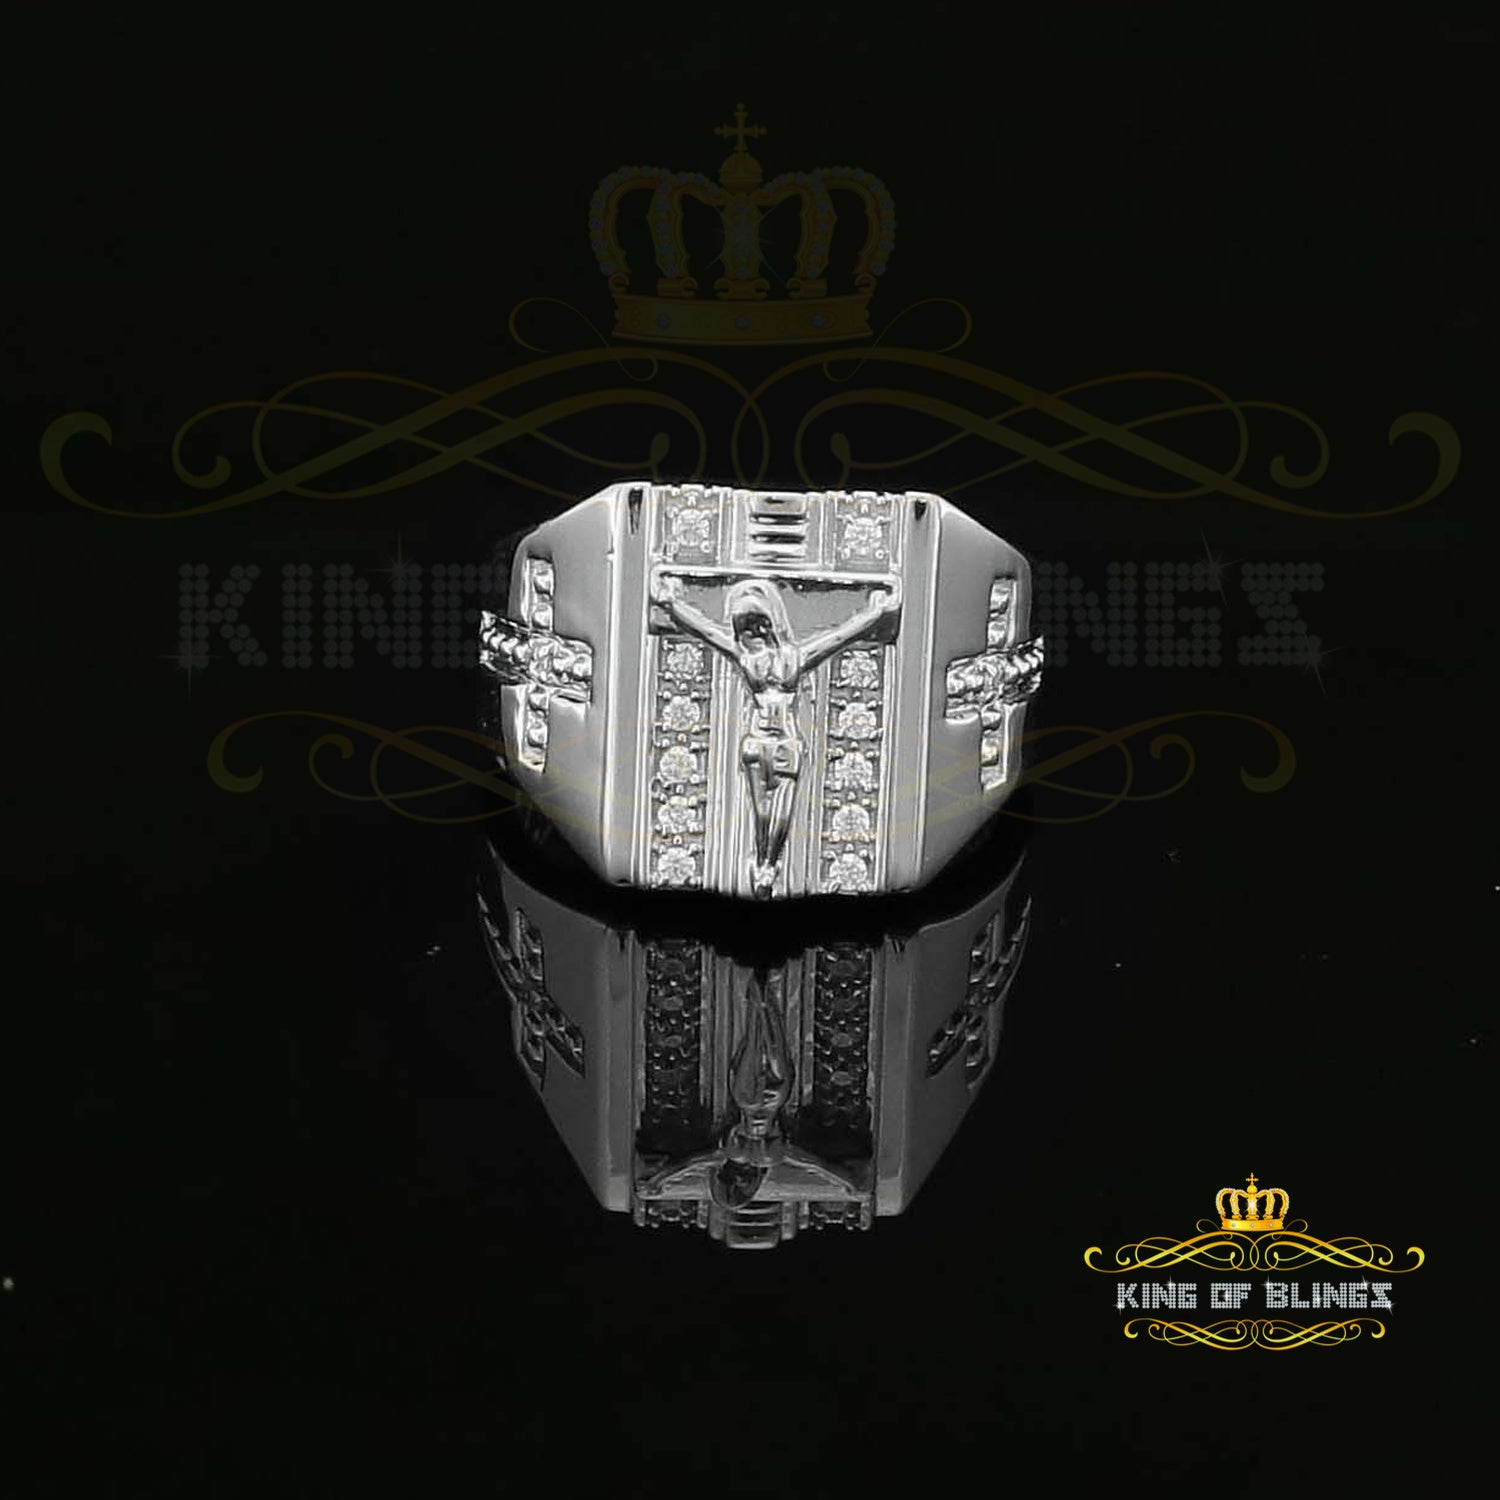 Jesus Design White Cubic Zirconia 0.45ct Men's Adjustable Ring From SZ 9 to 11 KING OF BLINGS